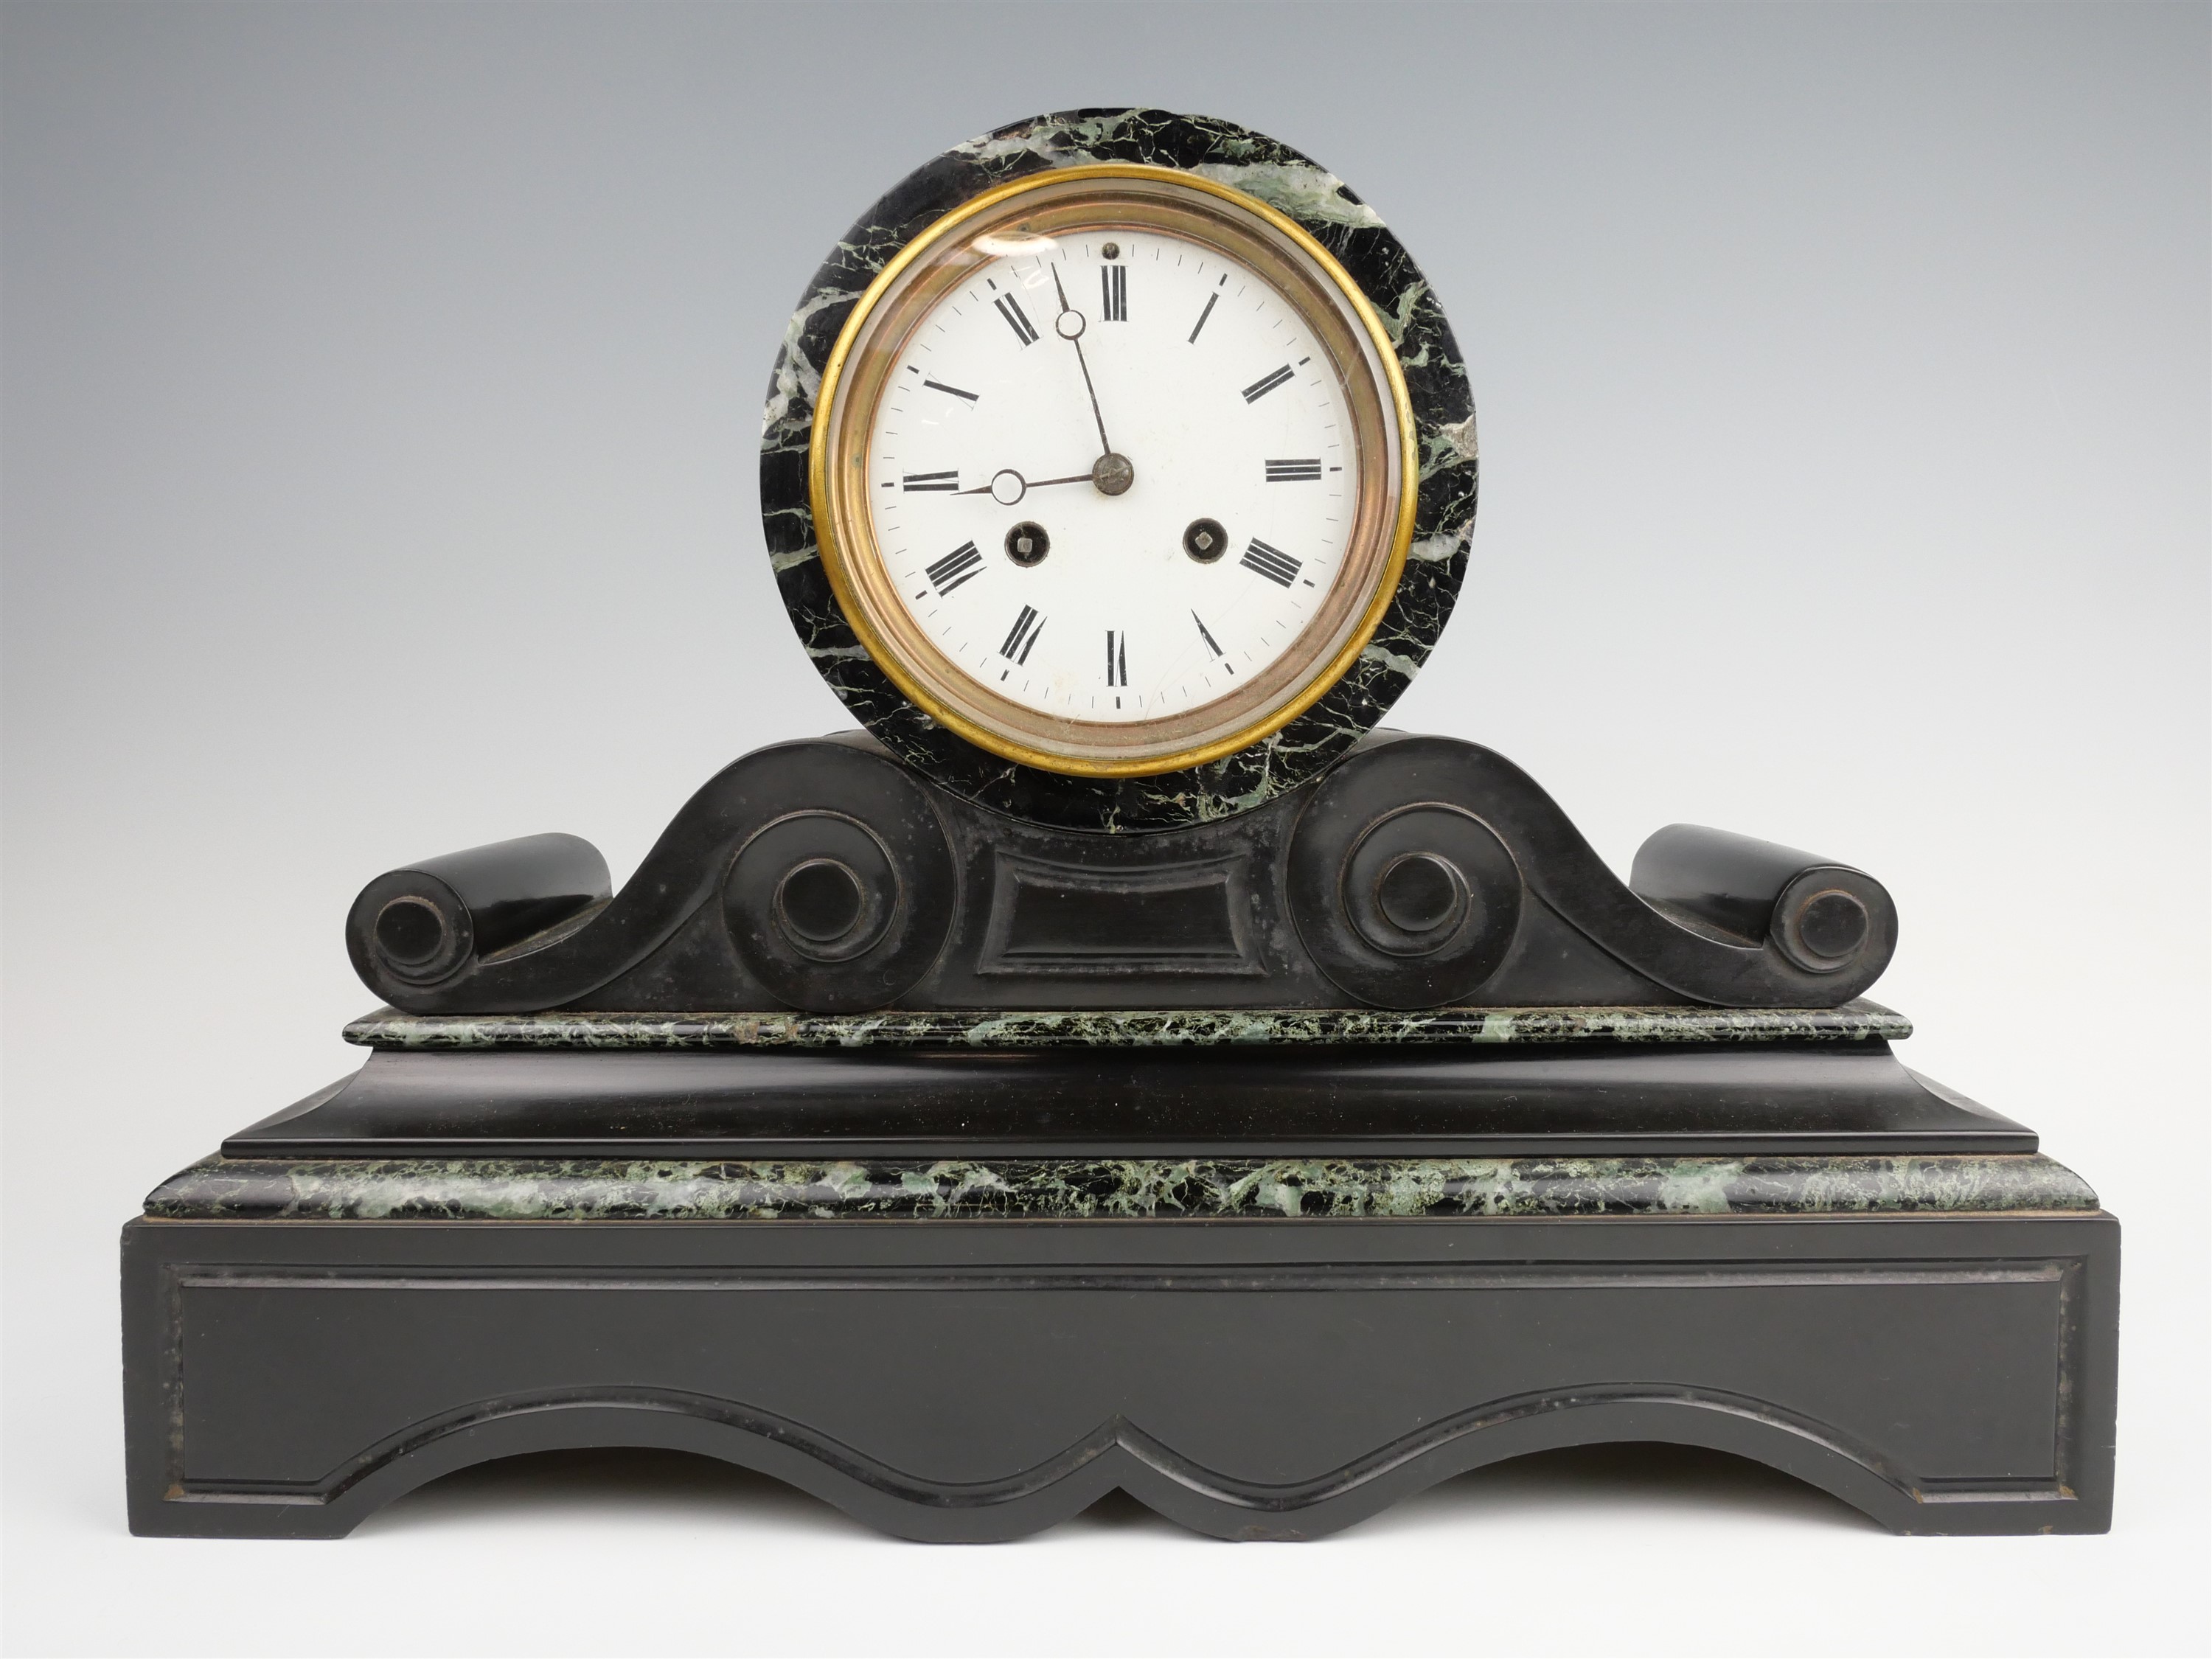 A Victorian marble mantle clock, having a two train drum movement striking on a bell in a black